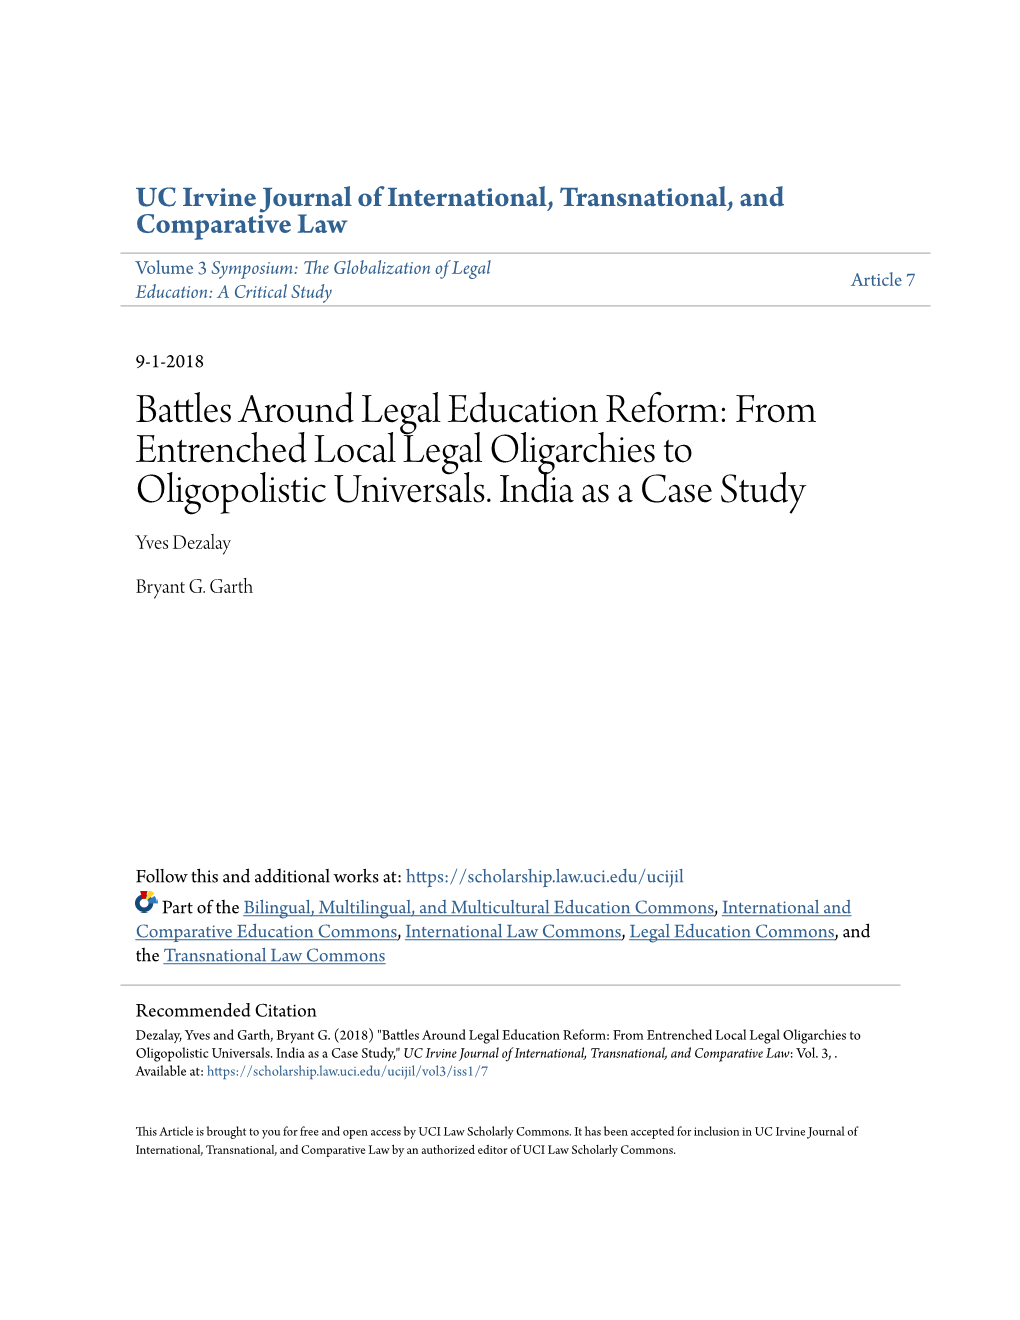 Battles Around Legal Education Reform: from Entrenched Local Legal Oligarchies to Oligopolistic Universals